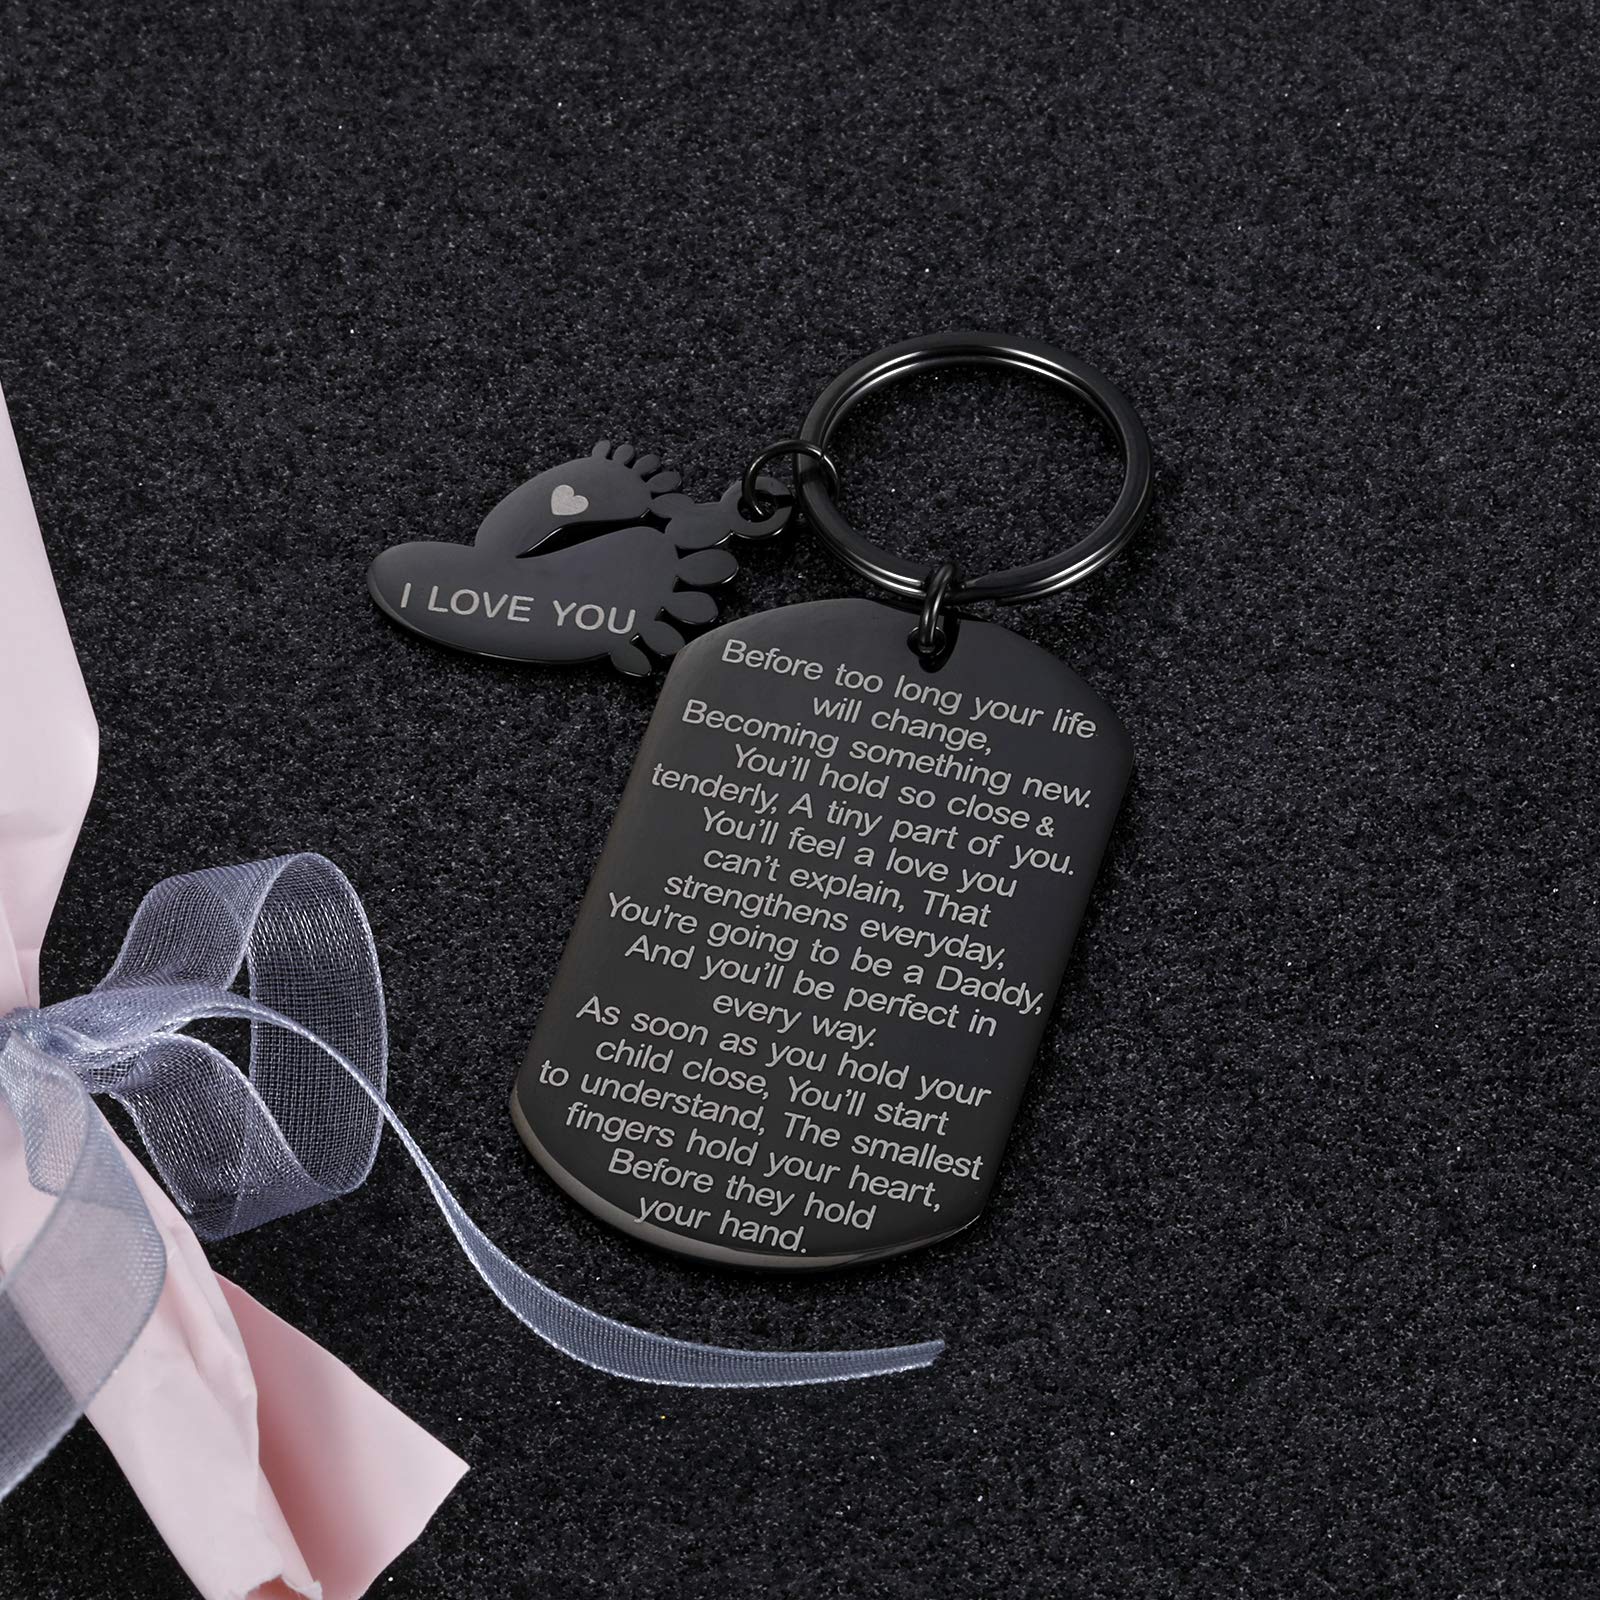 New Dad Keychain Daddy to Be Gifts Pregnancy Baby Announcement Gifts for Him New Father Mother Soon to Be Daddy Gifts for Men First Time Dads Moms Gifts from New Mommy Birthday Christmas Father’s Day